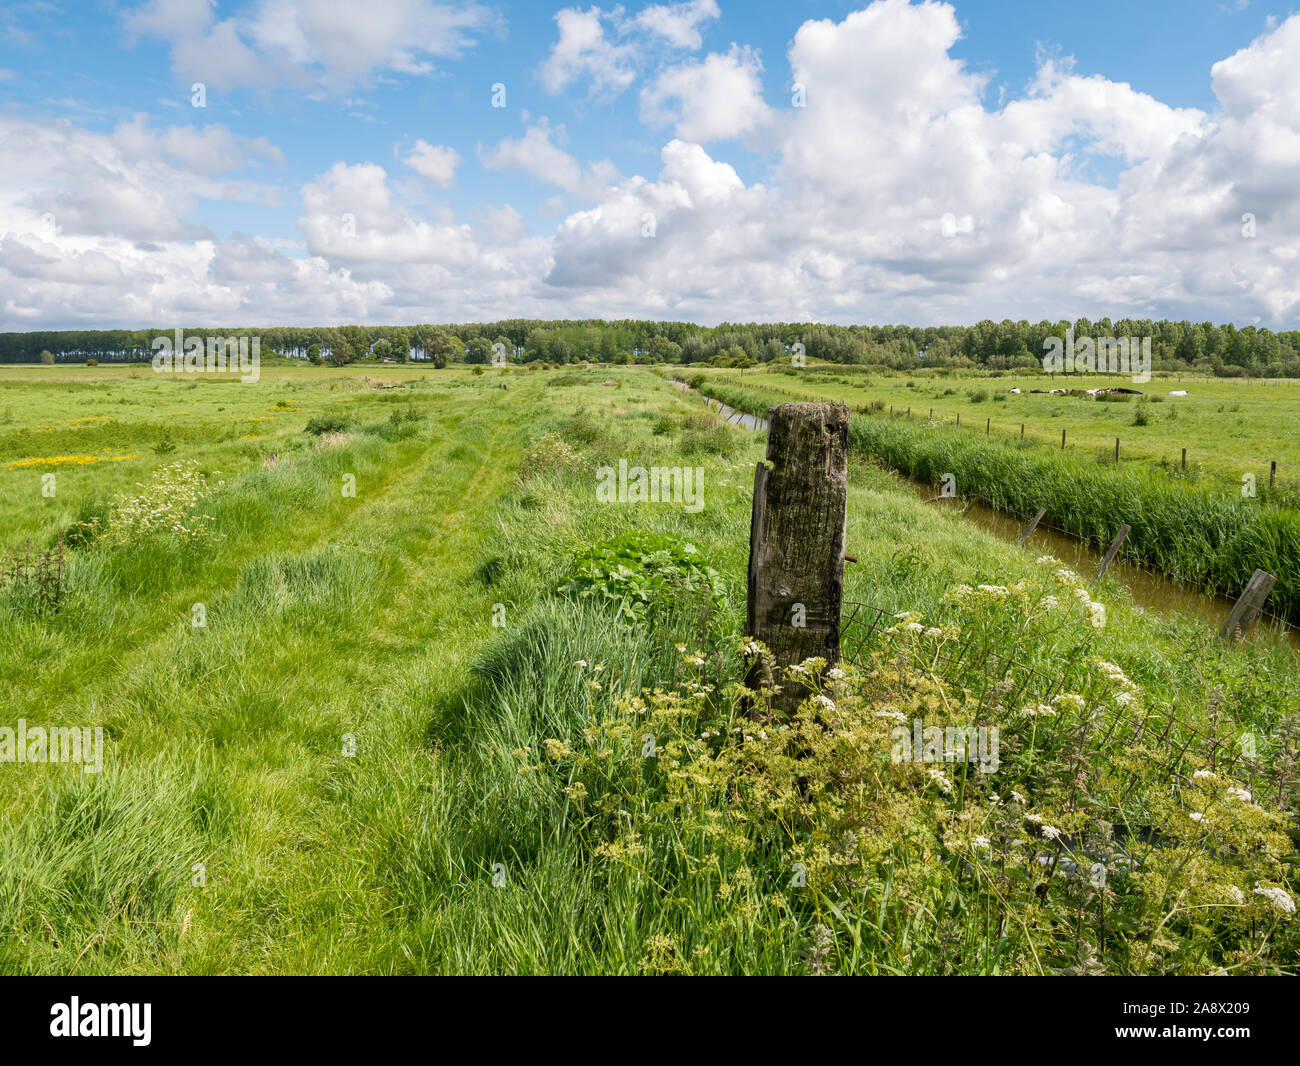 Panorama of grassland and ditch, West Flanders countryside near Damme, Flanders, Belgium Stock Photo